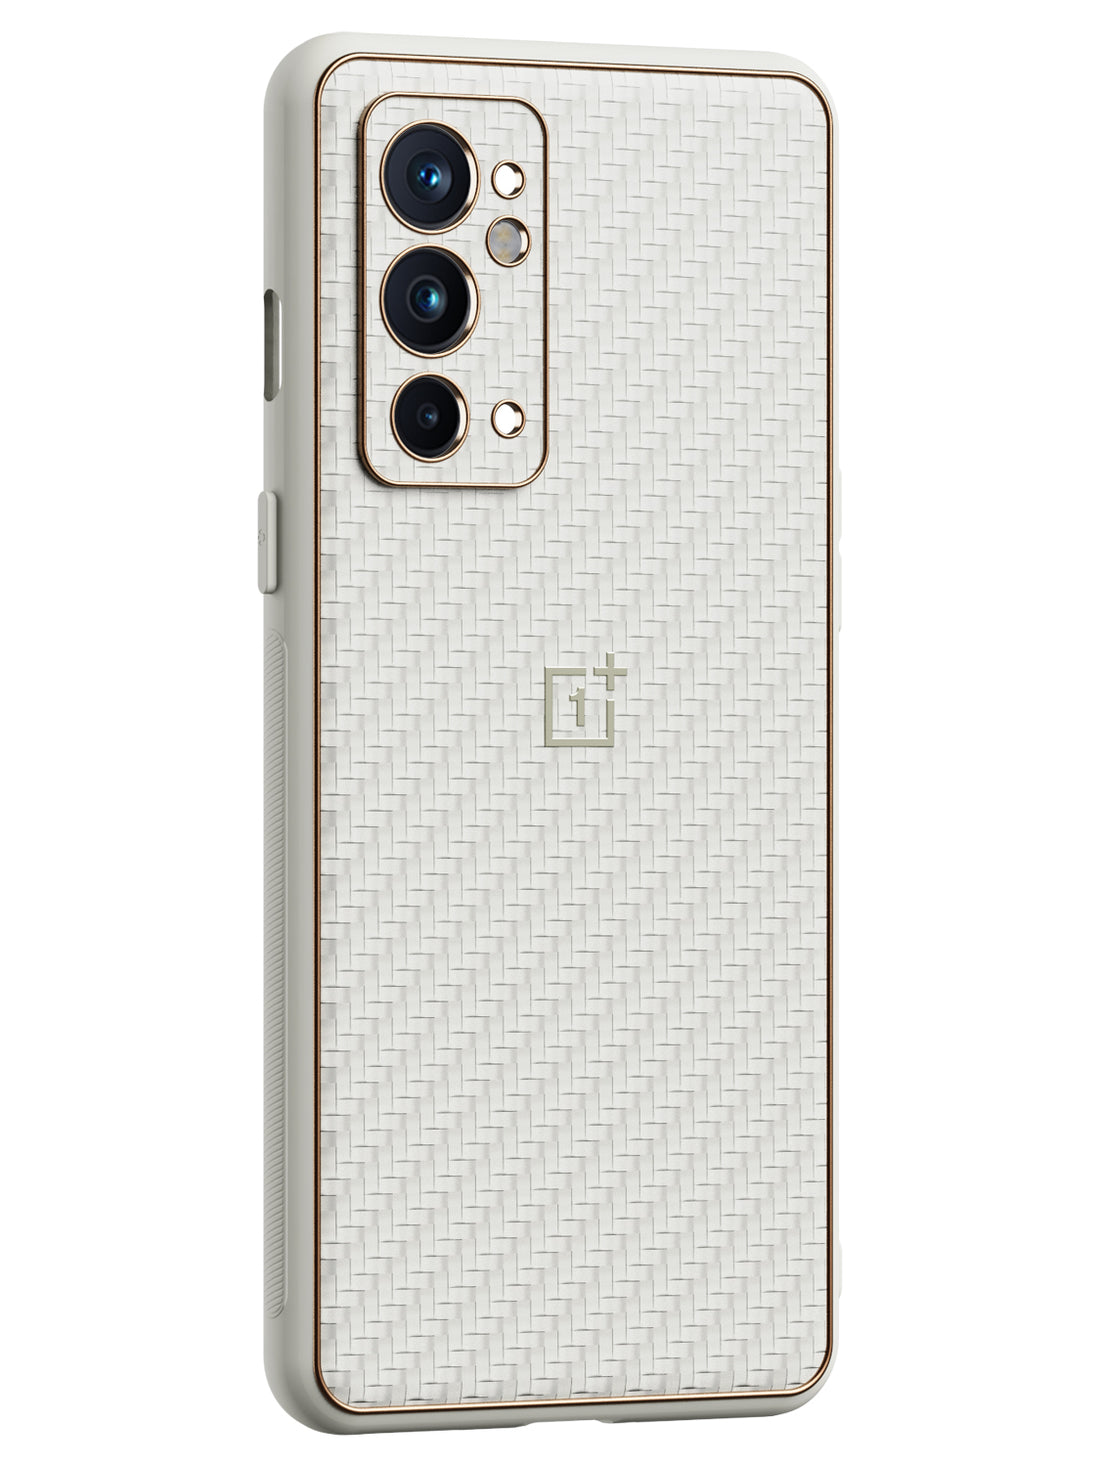 oneplus 9rt case , oneplus 9rt premium case , oneplus 9rt back cover with logo